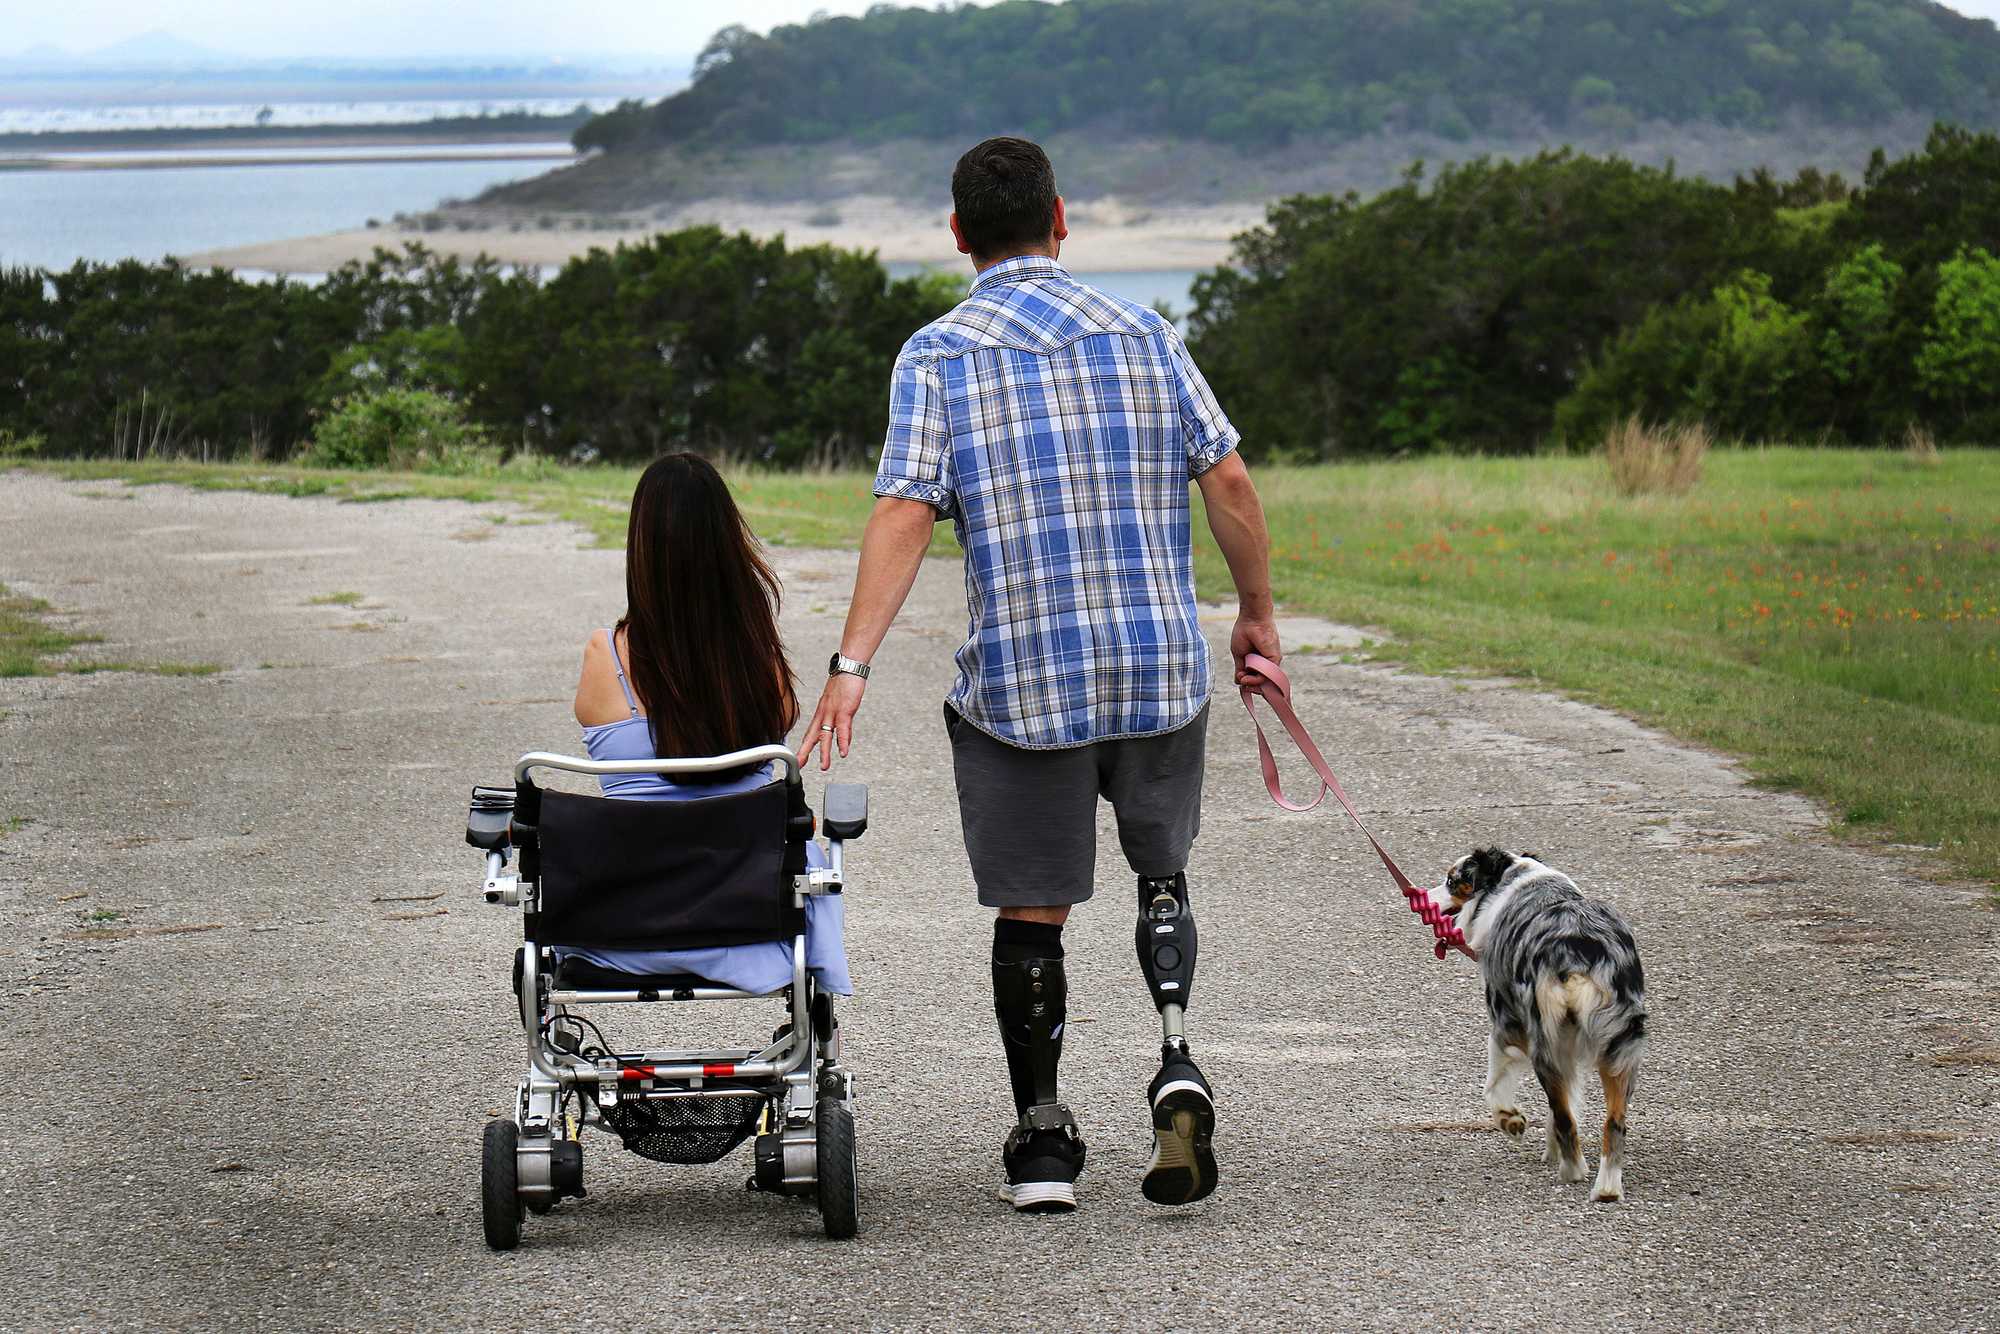  The couple walked through a park near their home with her dog, Sadie.